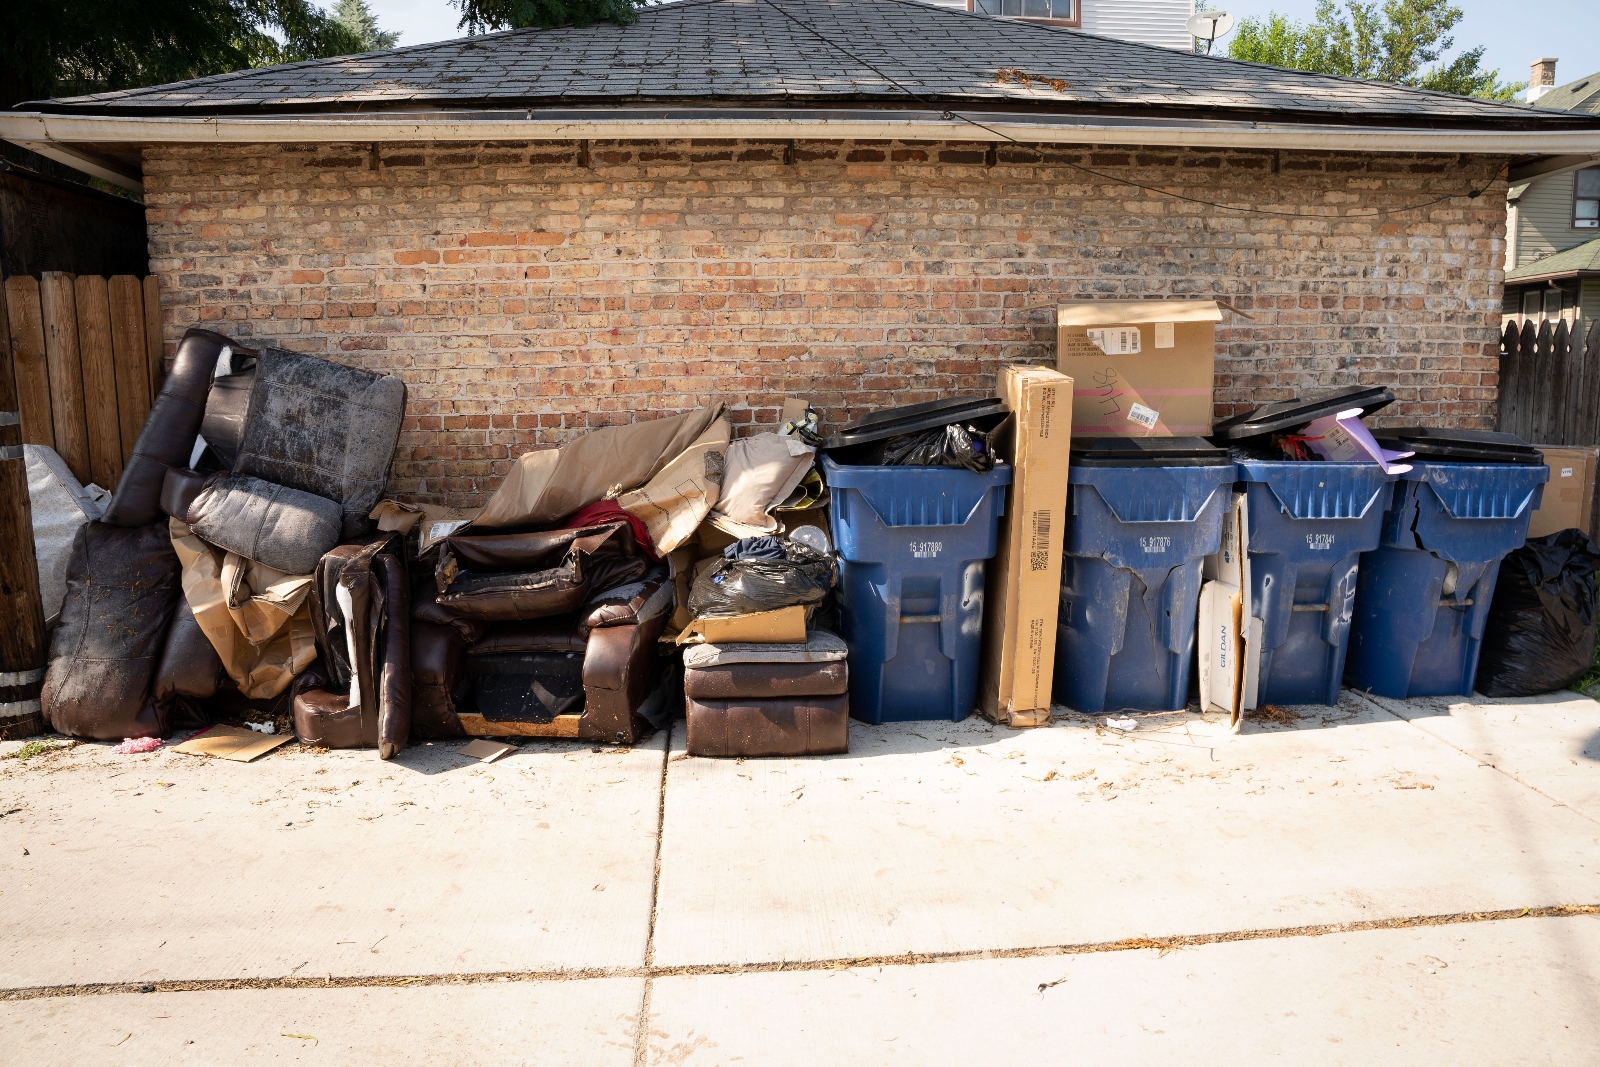 Trash bins and damaged furniture sit outside of a house.